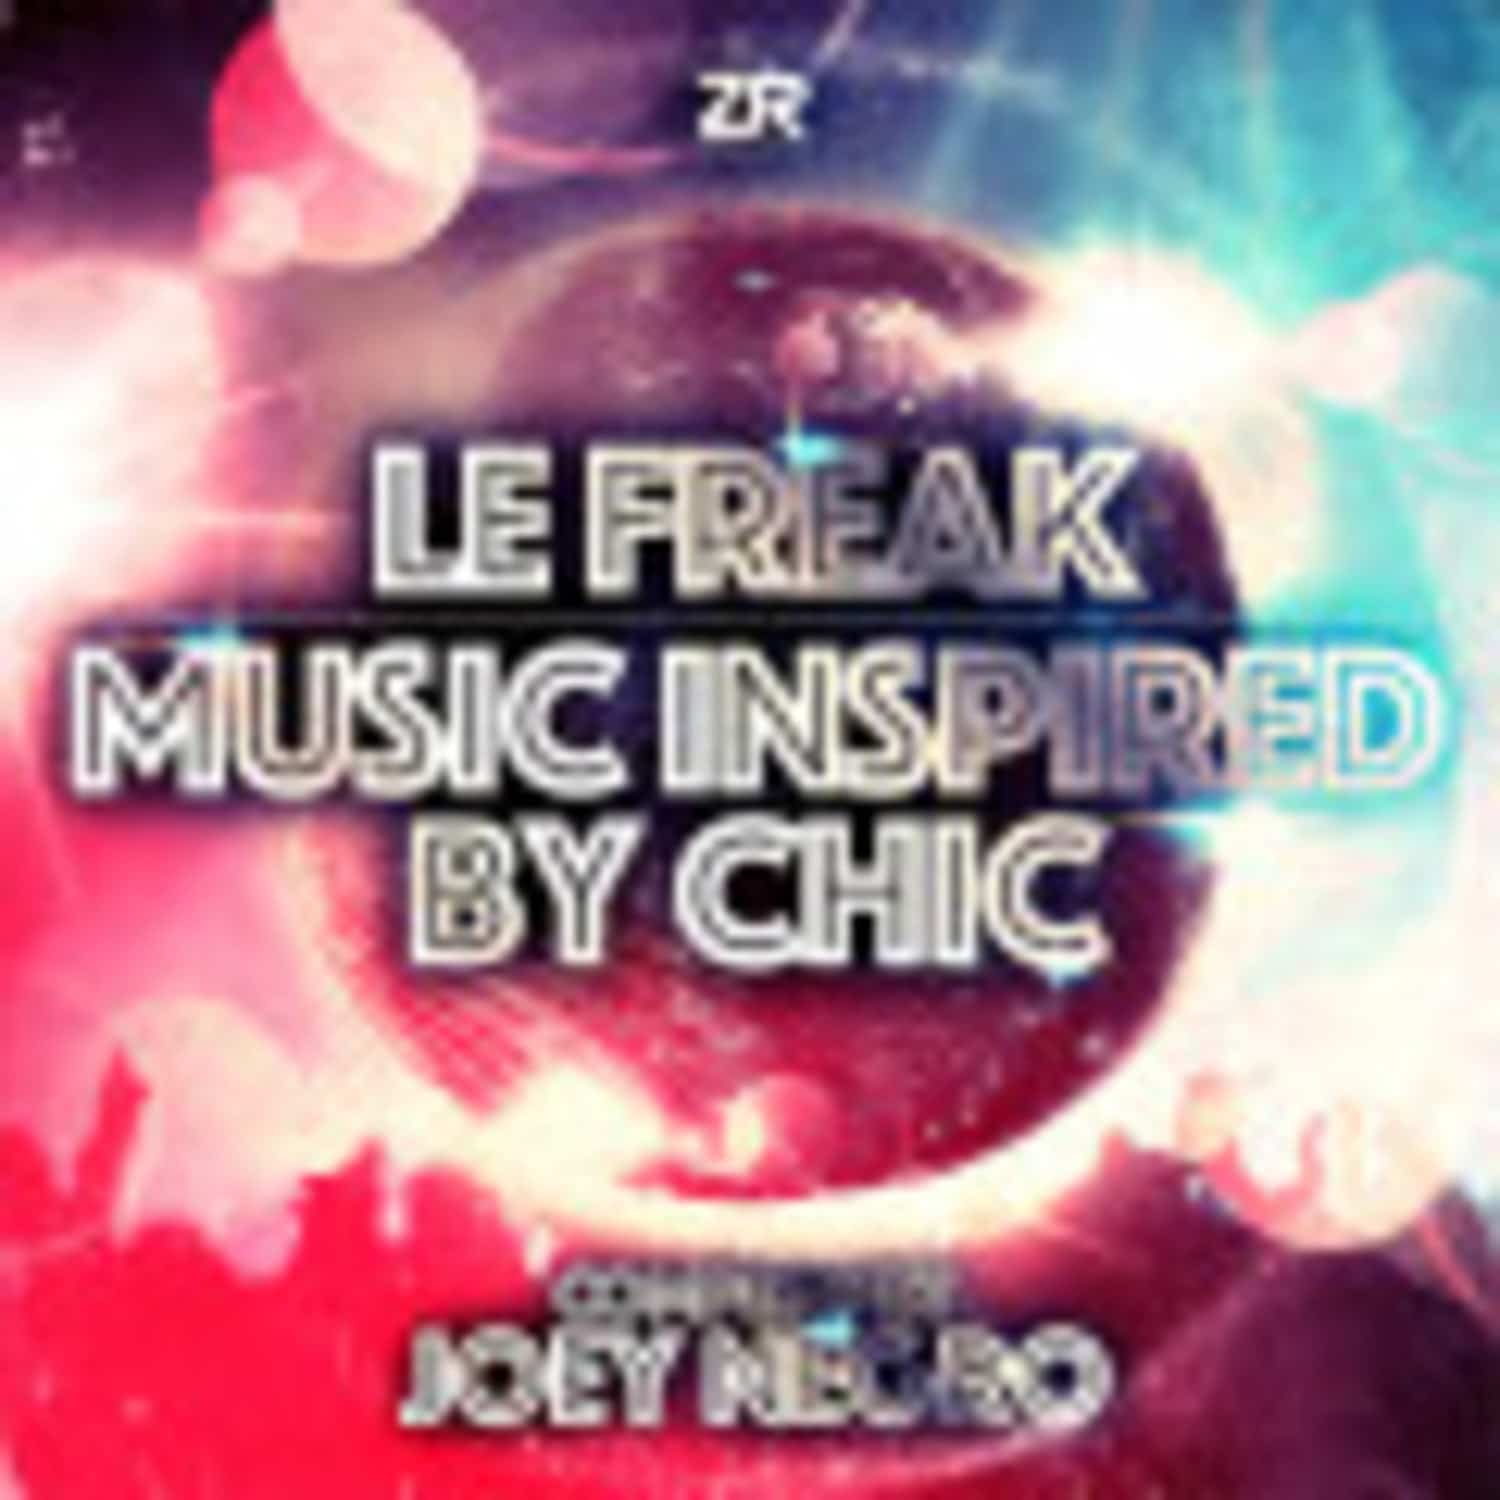 Joey Negro - LE FREAK - MUSIC INSPIRED BY CHIC 